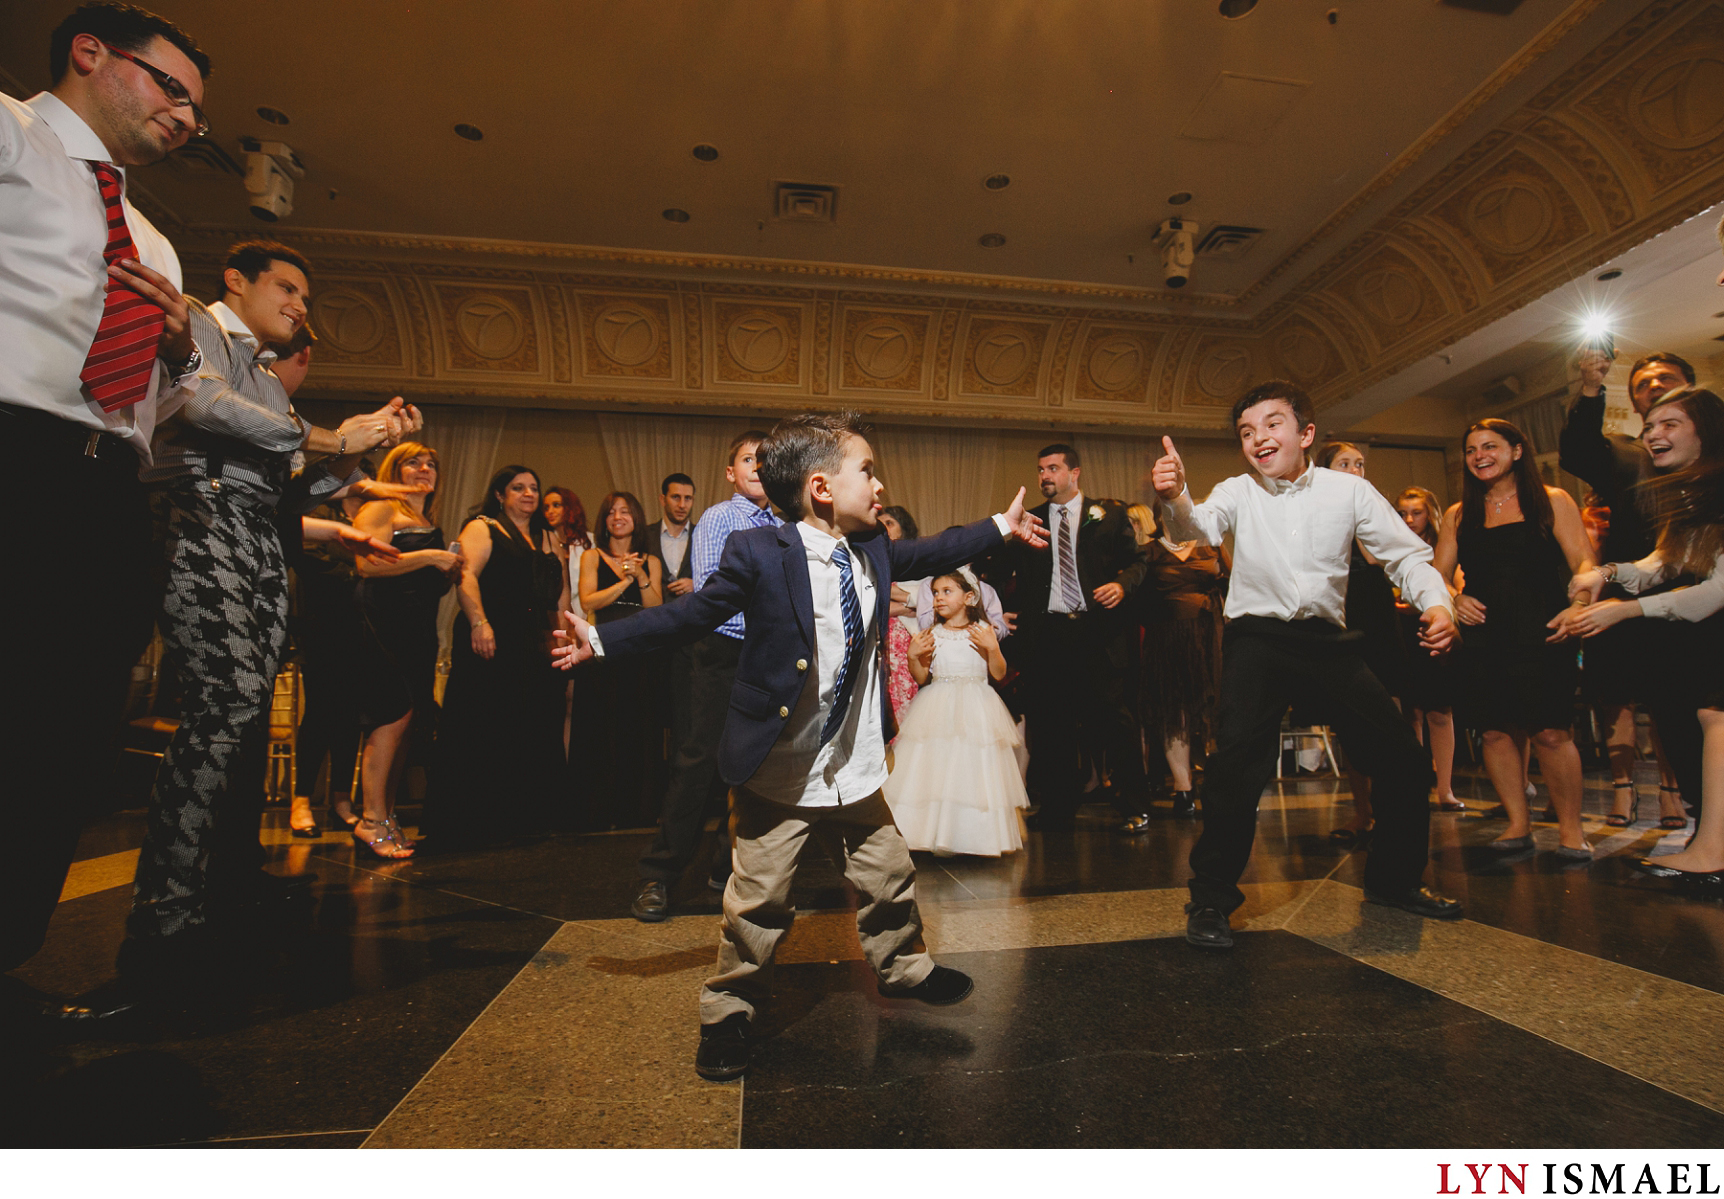 Young boys showing their moves on the dance floor at Paradise Banquet Hall as documented by a Vaughan wedding photojournalist.